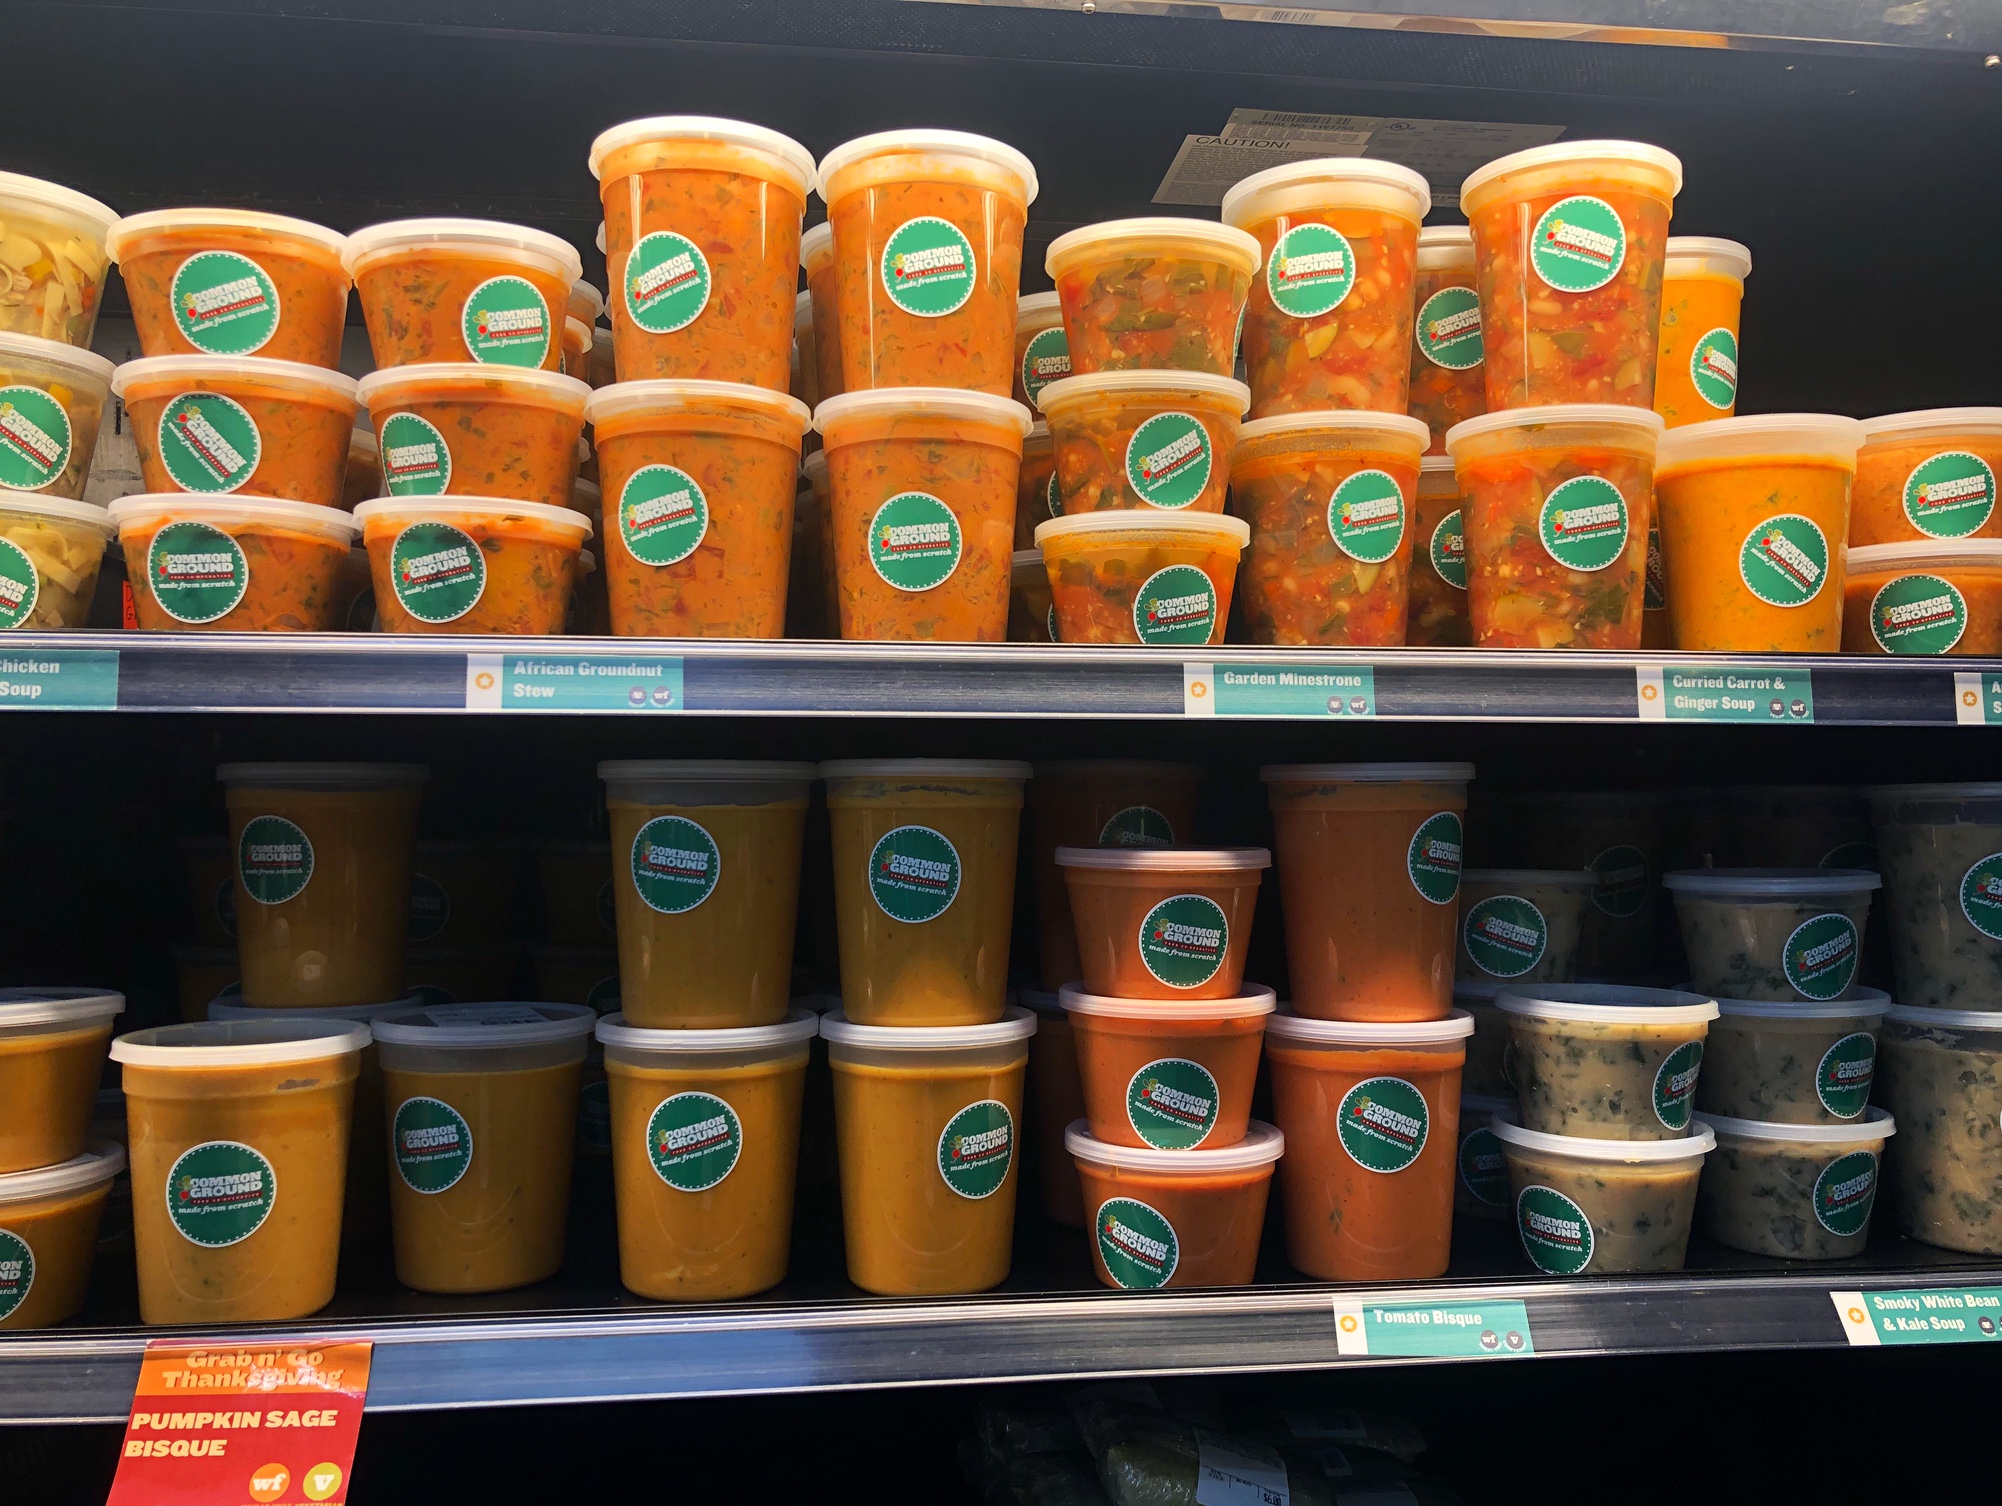 On two shelves, tall cylindrical plastic containers hold orange soups and sauces for sale at the grab-and-go section of Common Ground. Photo by Alyssa Buckley.